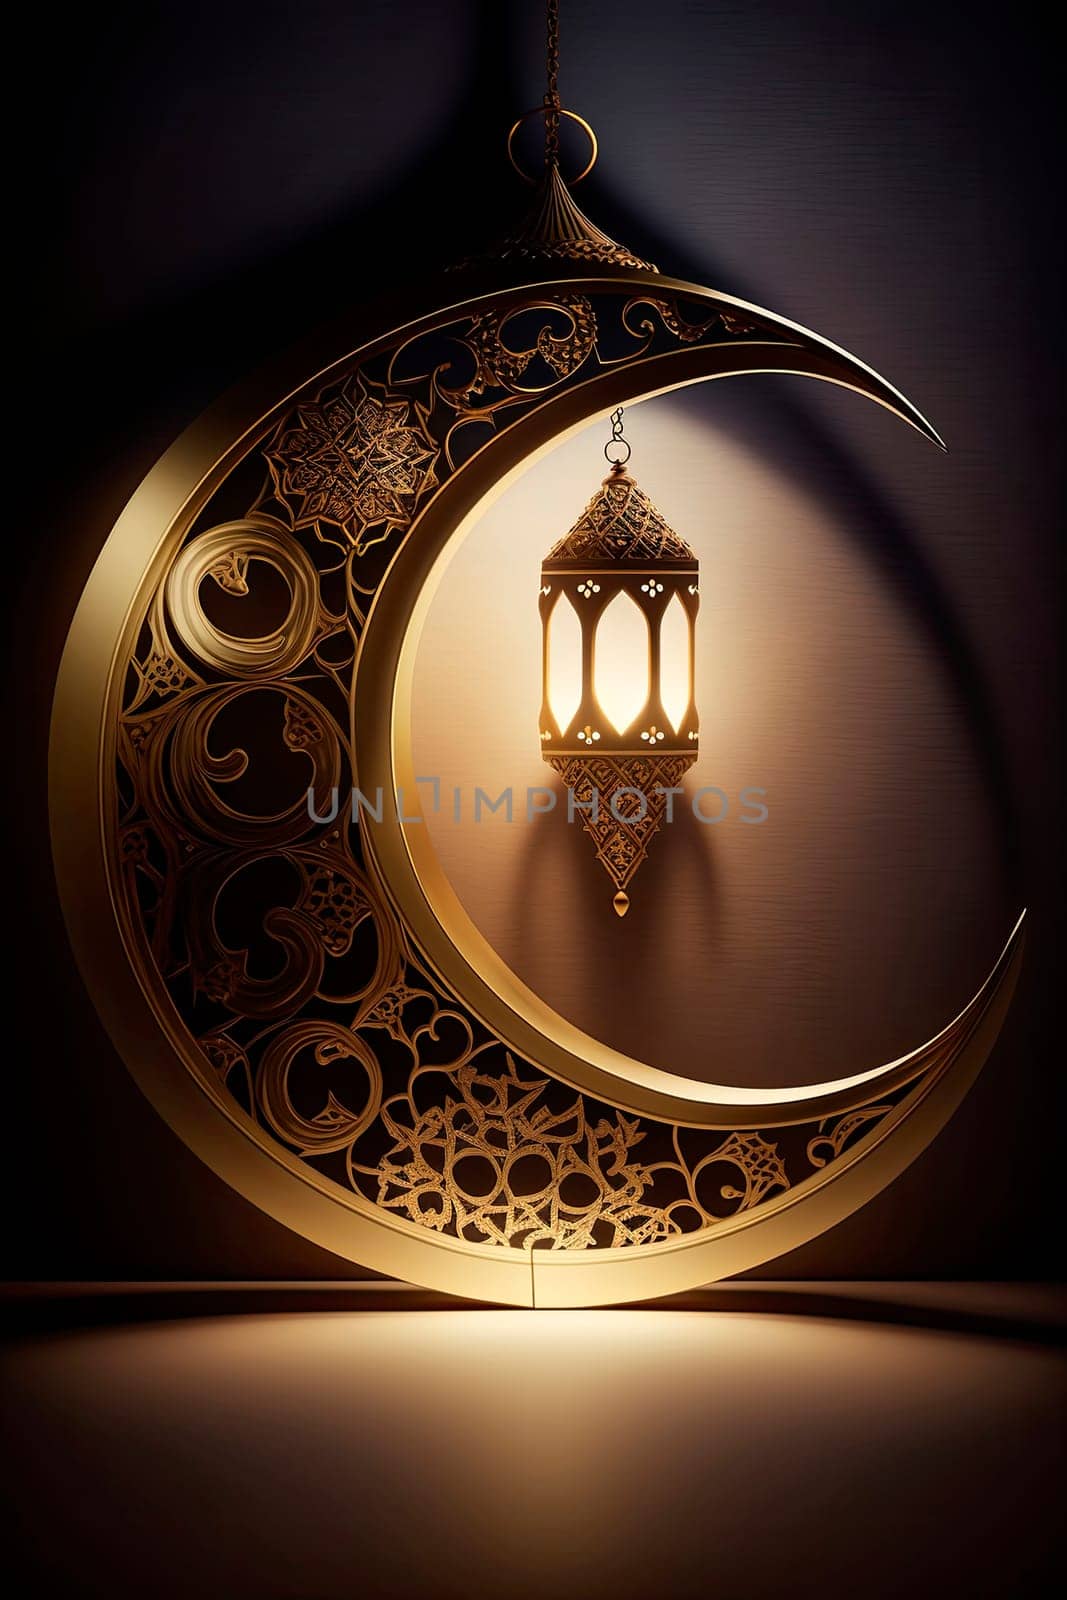 Luminaire in the shape of a golden crescent and an Arabic pendant lamp for the Islamic holiday of Ramadan. by yanadjana